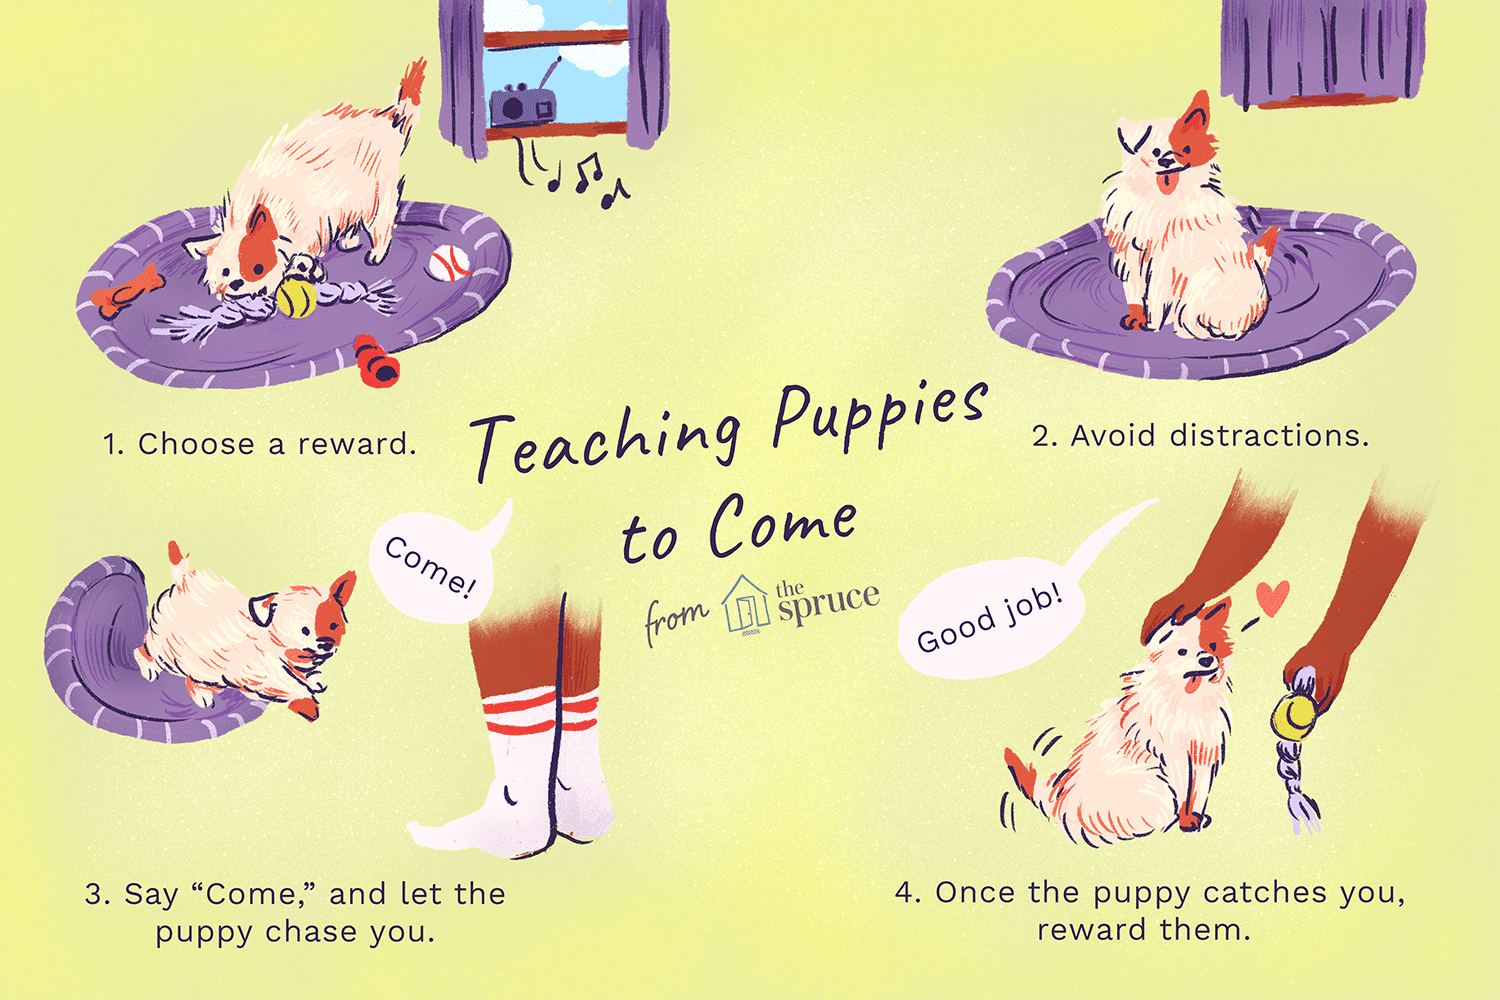 An illustration showing how to teach a puppy to come